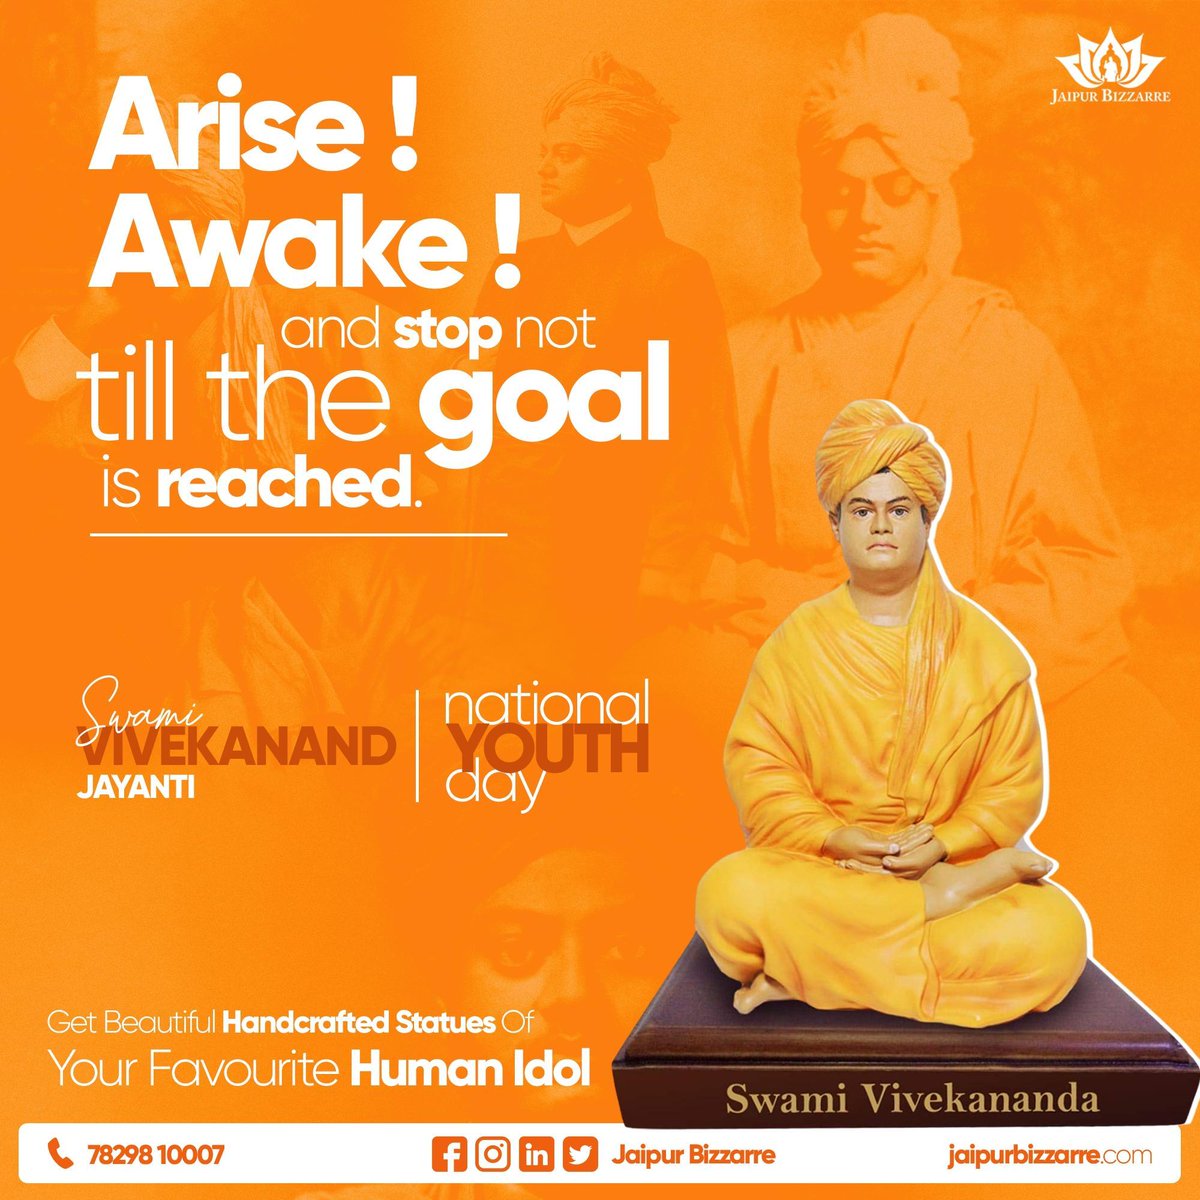 Let’s Remember Swami Vivekanand On His Birth Anniversary..

Wish you a very Happy National  Youth Day..

#jaipurbizzarre #positivity #bestmarblemurti #gifted #bestmurtis #officemutris #homestatue #marblestatue #divineidols #statue #marblestatueofdivineidols